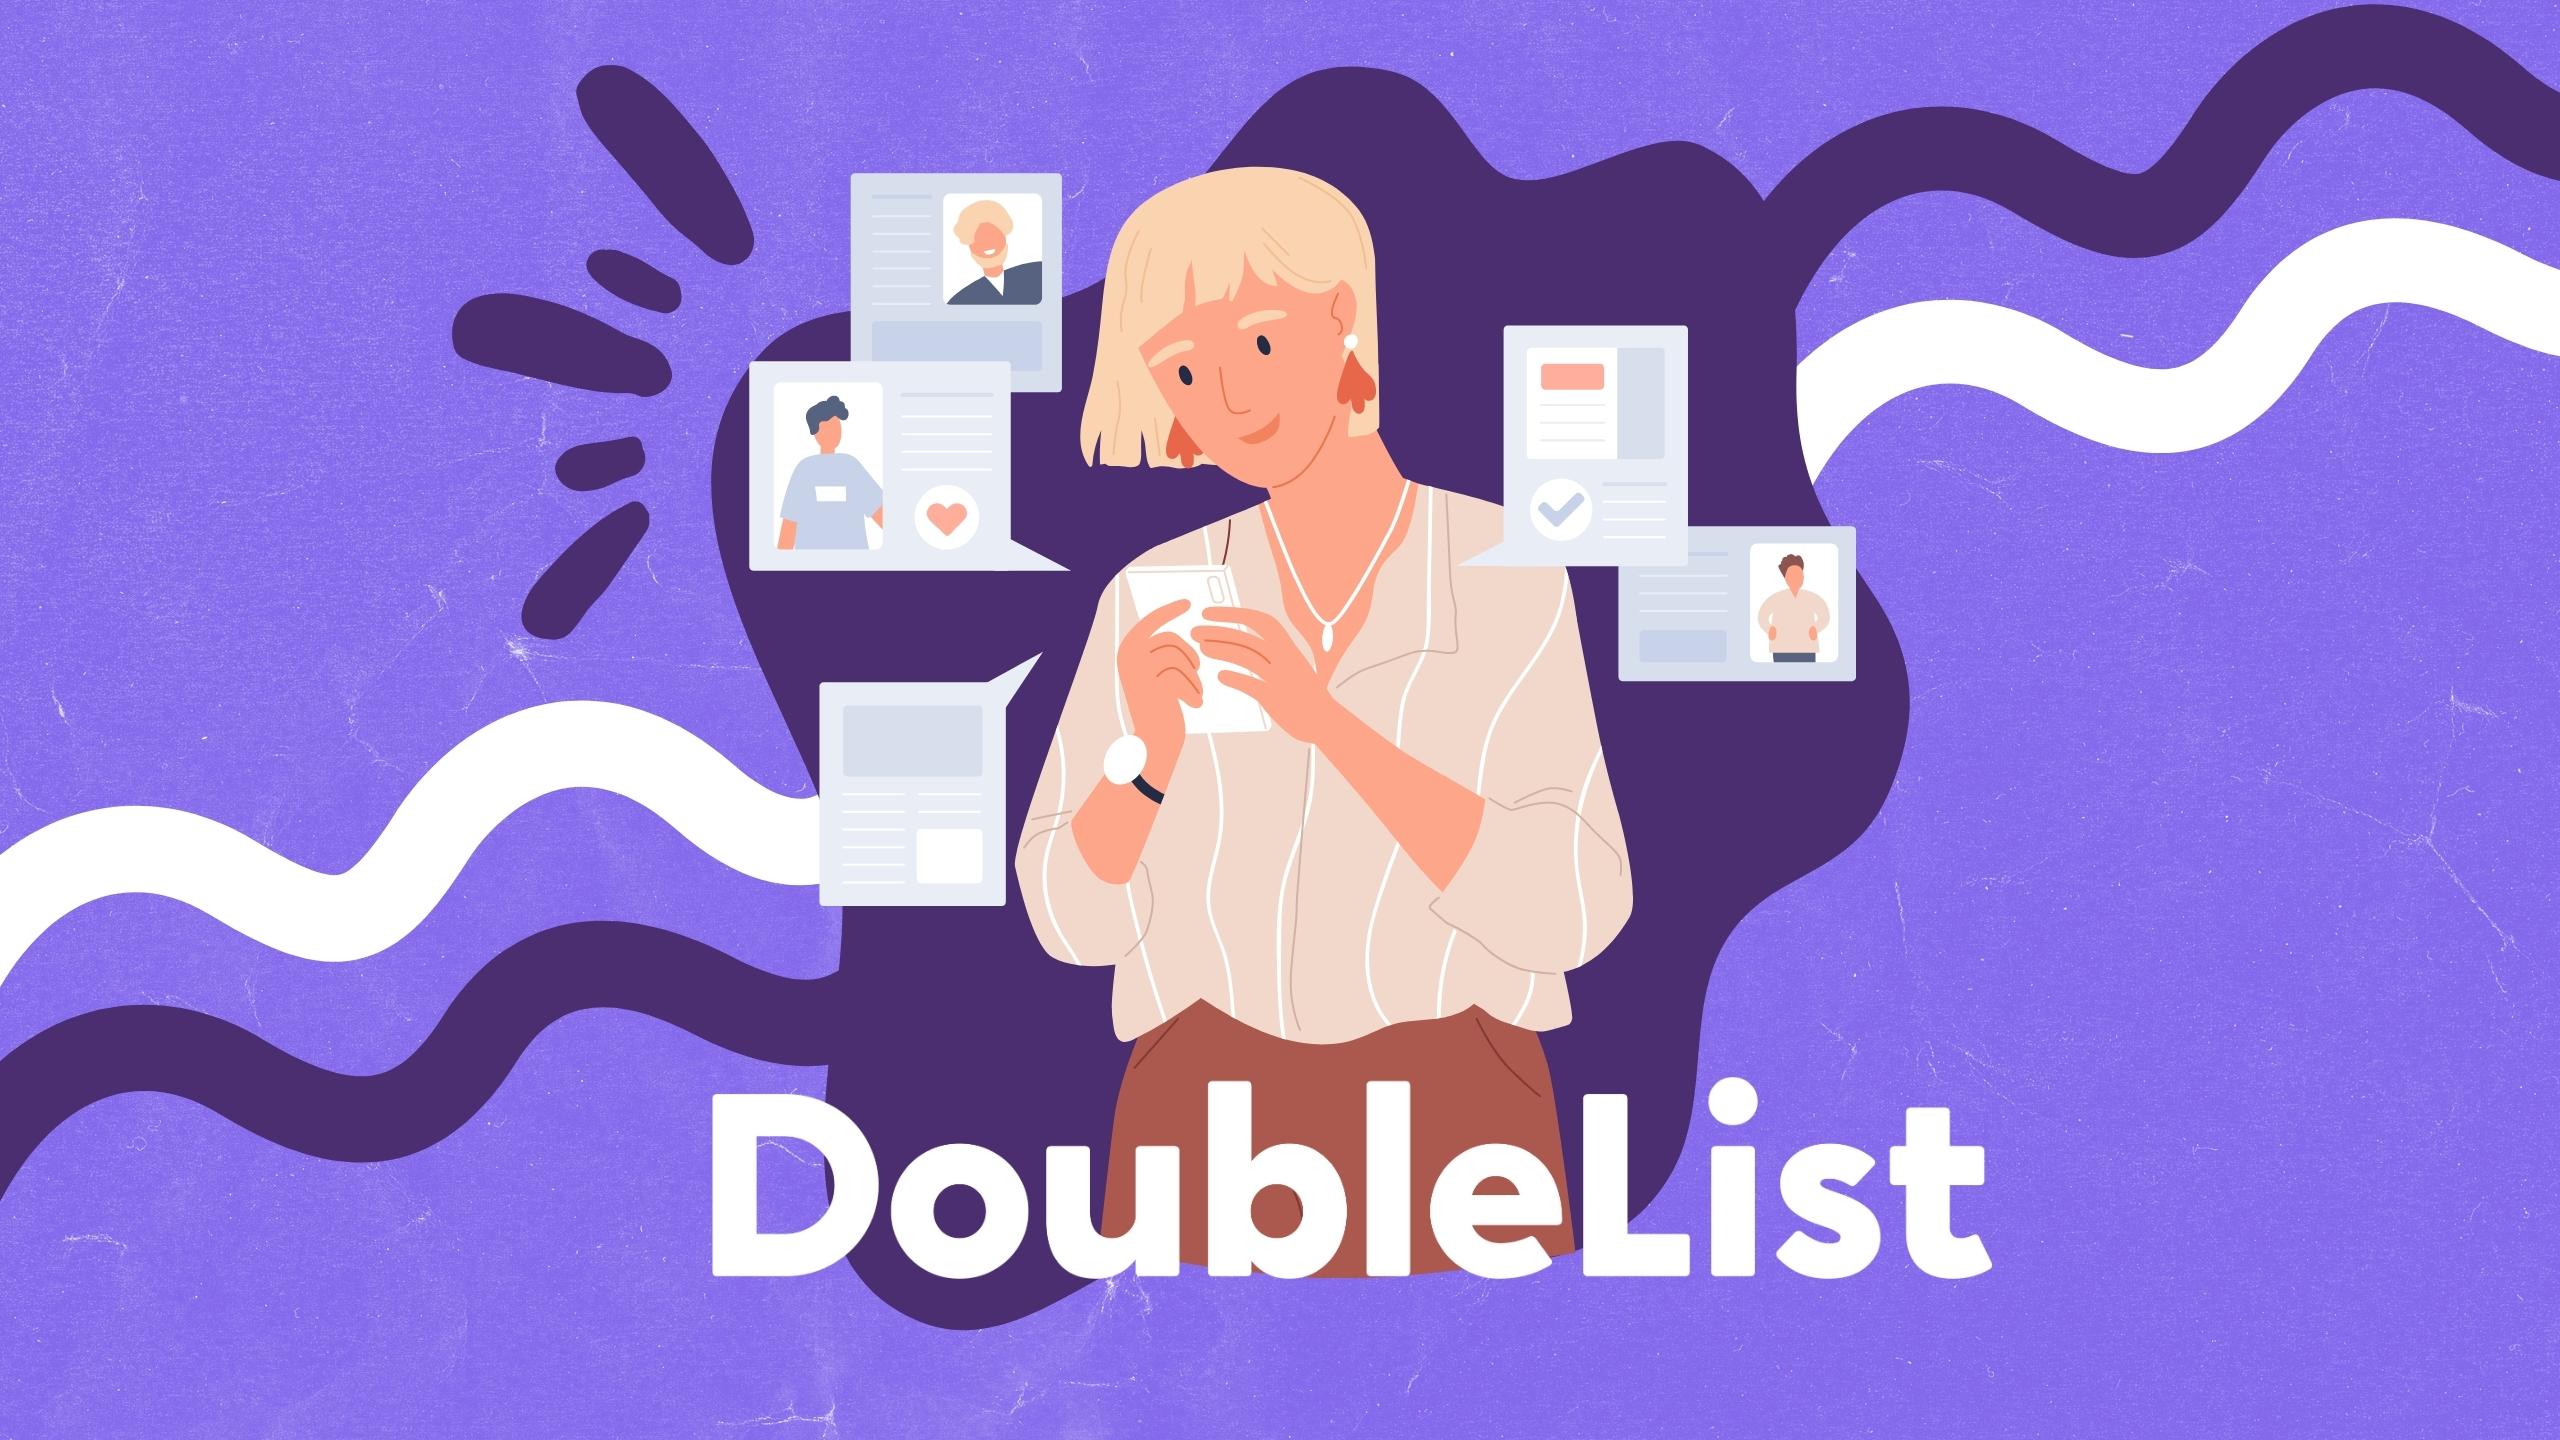 Doublelist Now Requires Subscription: What Does This Mean for You?